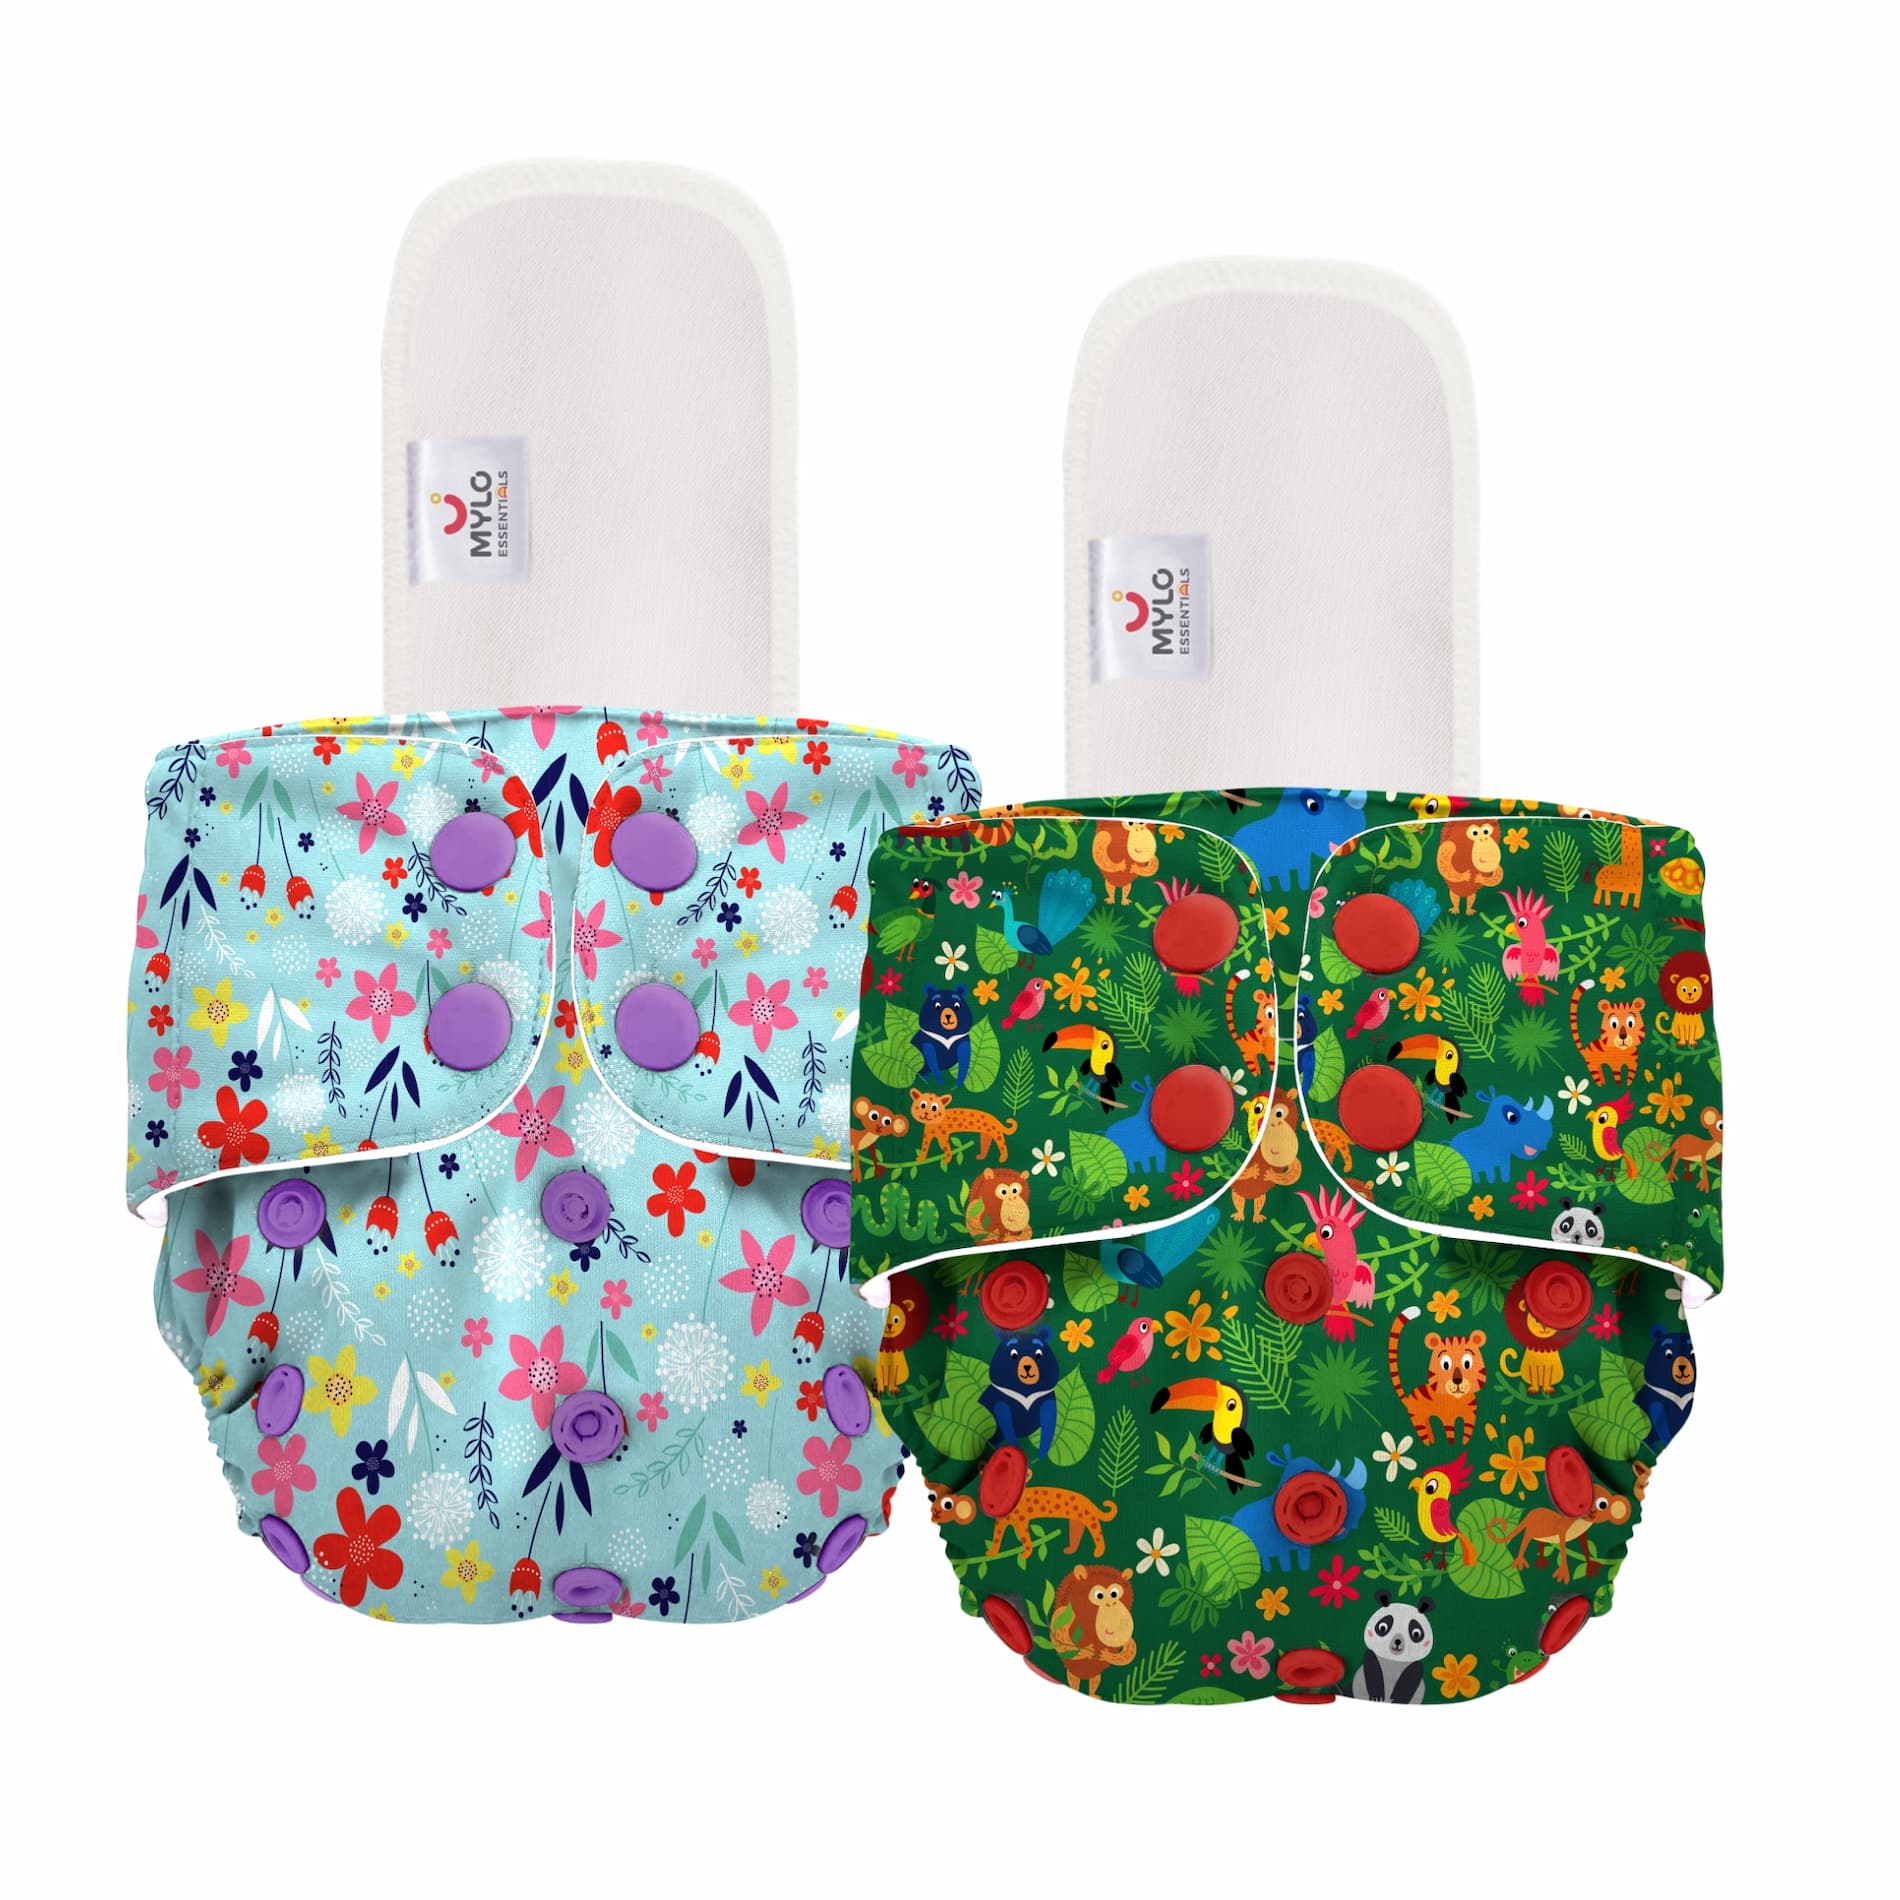 Mylo Adjustable Washable & Reusable Cloth Diaper With Dry Feel, Absorbent Insert Pad (3M-3Y) - Floral Spring & Jungle - Pack of 2